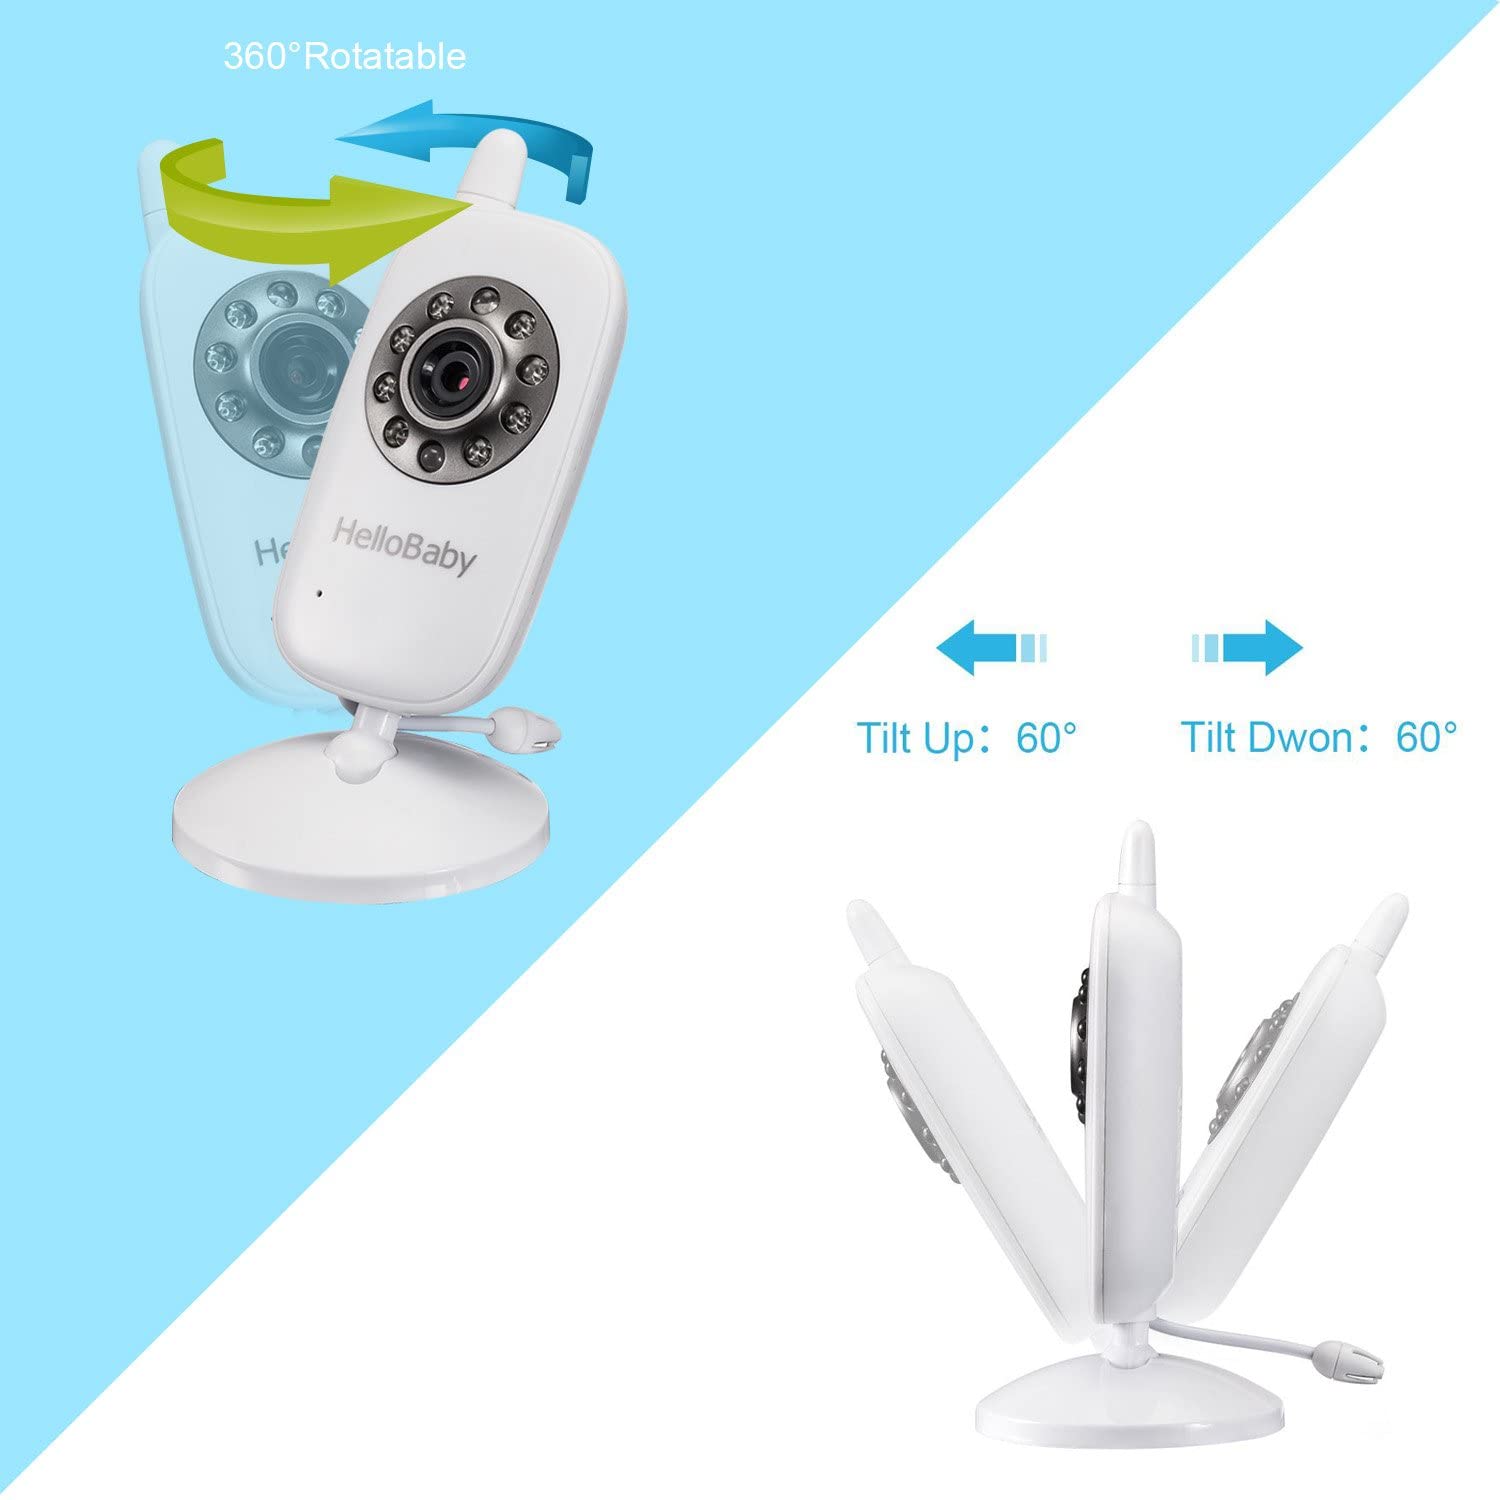 HelloBaby Monitor HB32, Video Baby Monitors with Night Vision, Hellobaby